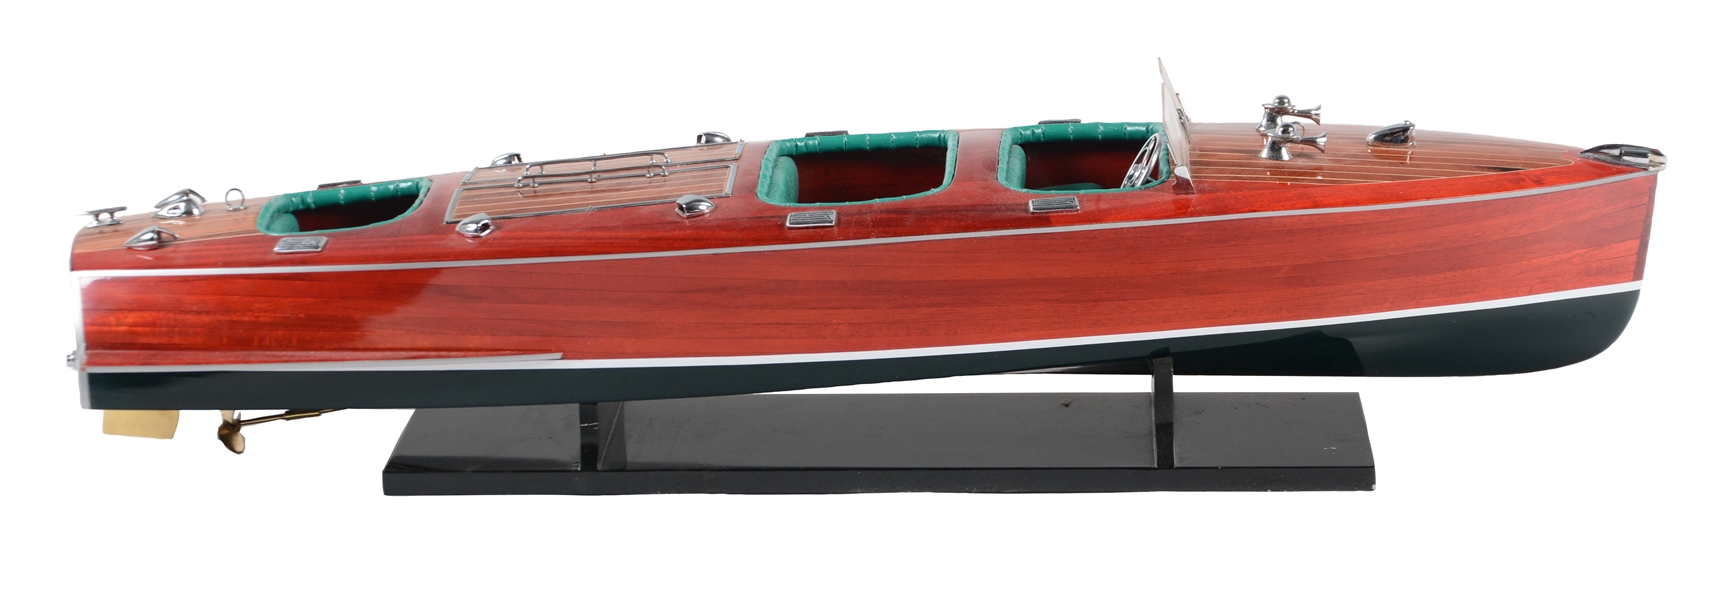 CONTEMPORARY WOODEN MODEL SPEED BOAT ON STAND. 